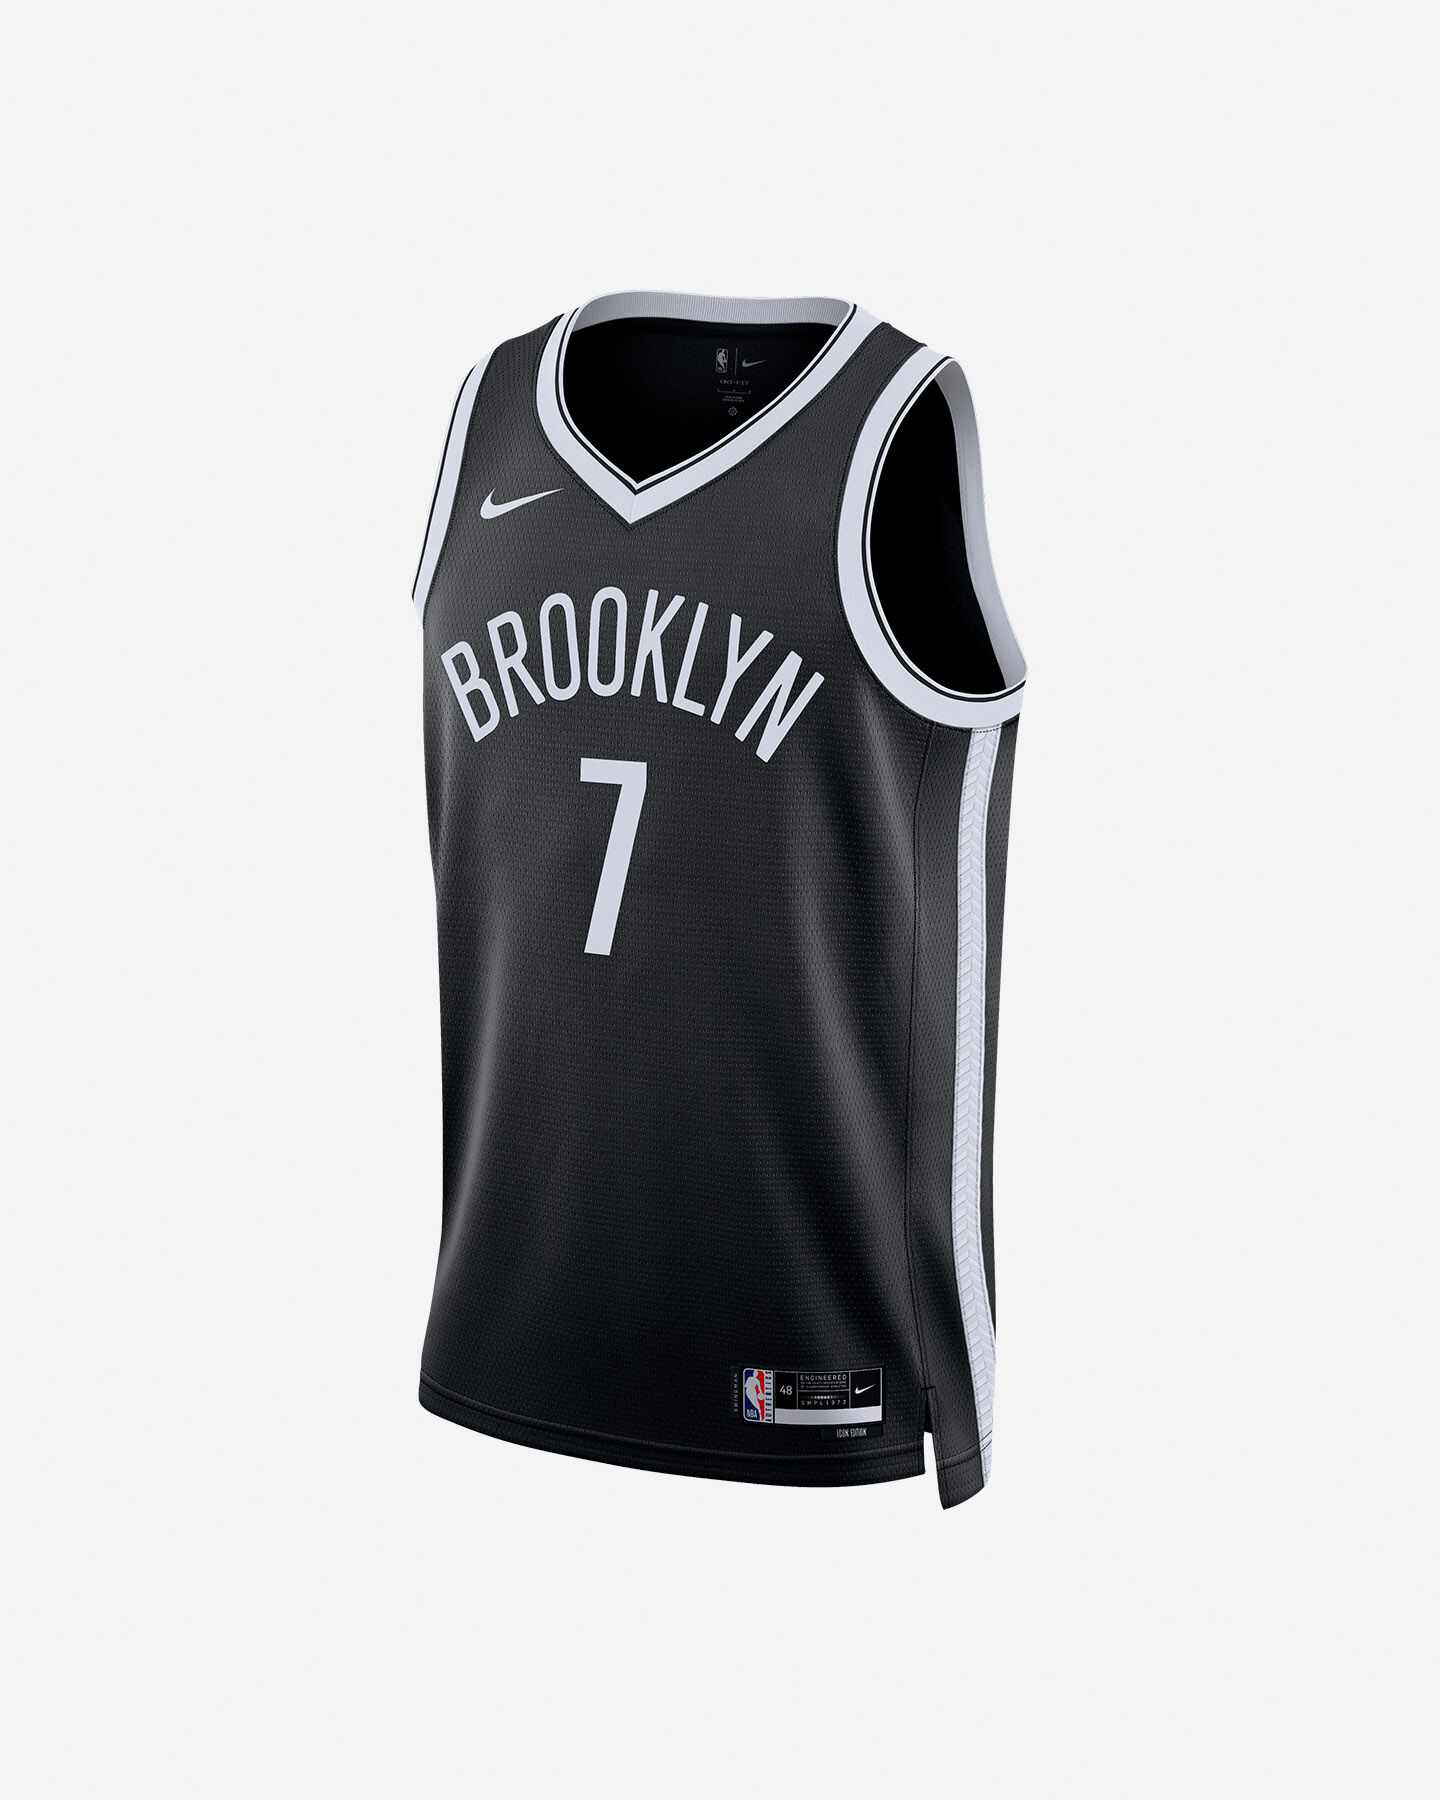  Canotta basket NIKE ICON BROOKLYN DURANT K. SWING 2  S5457101|011|S scatto 0